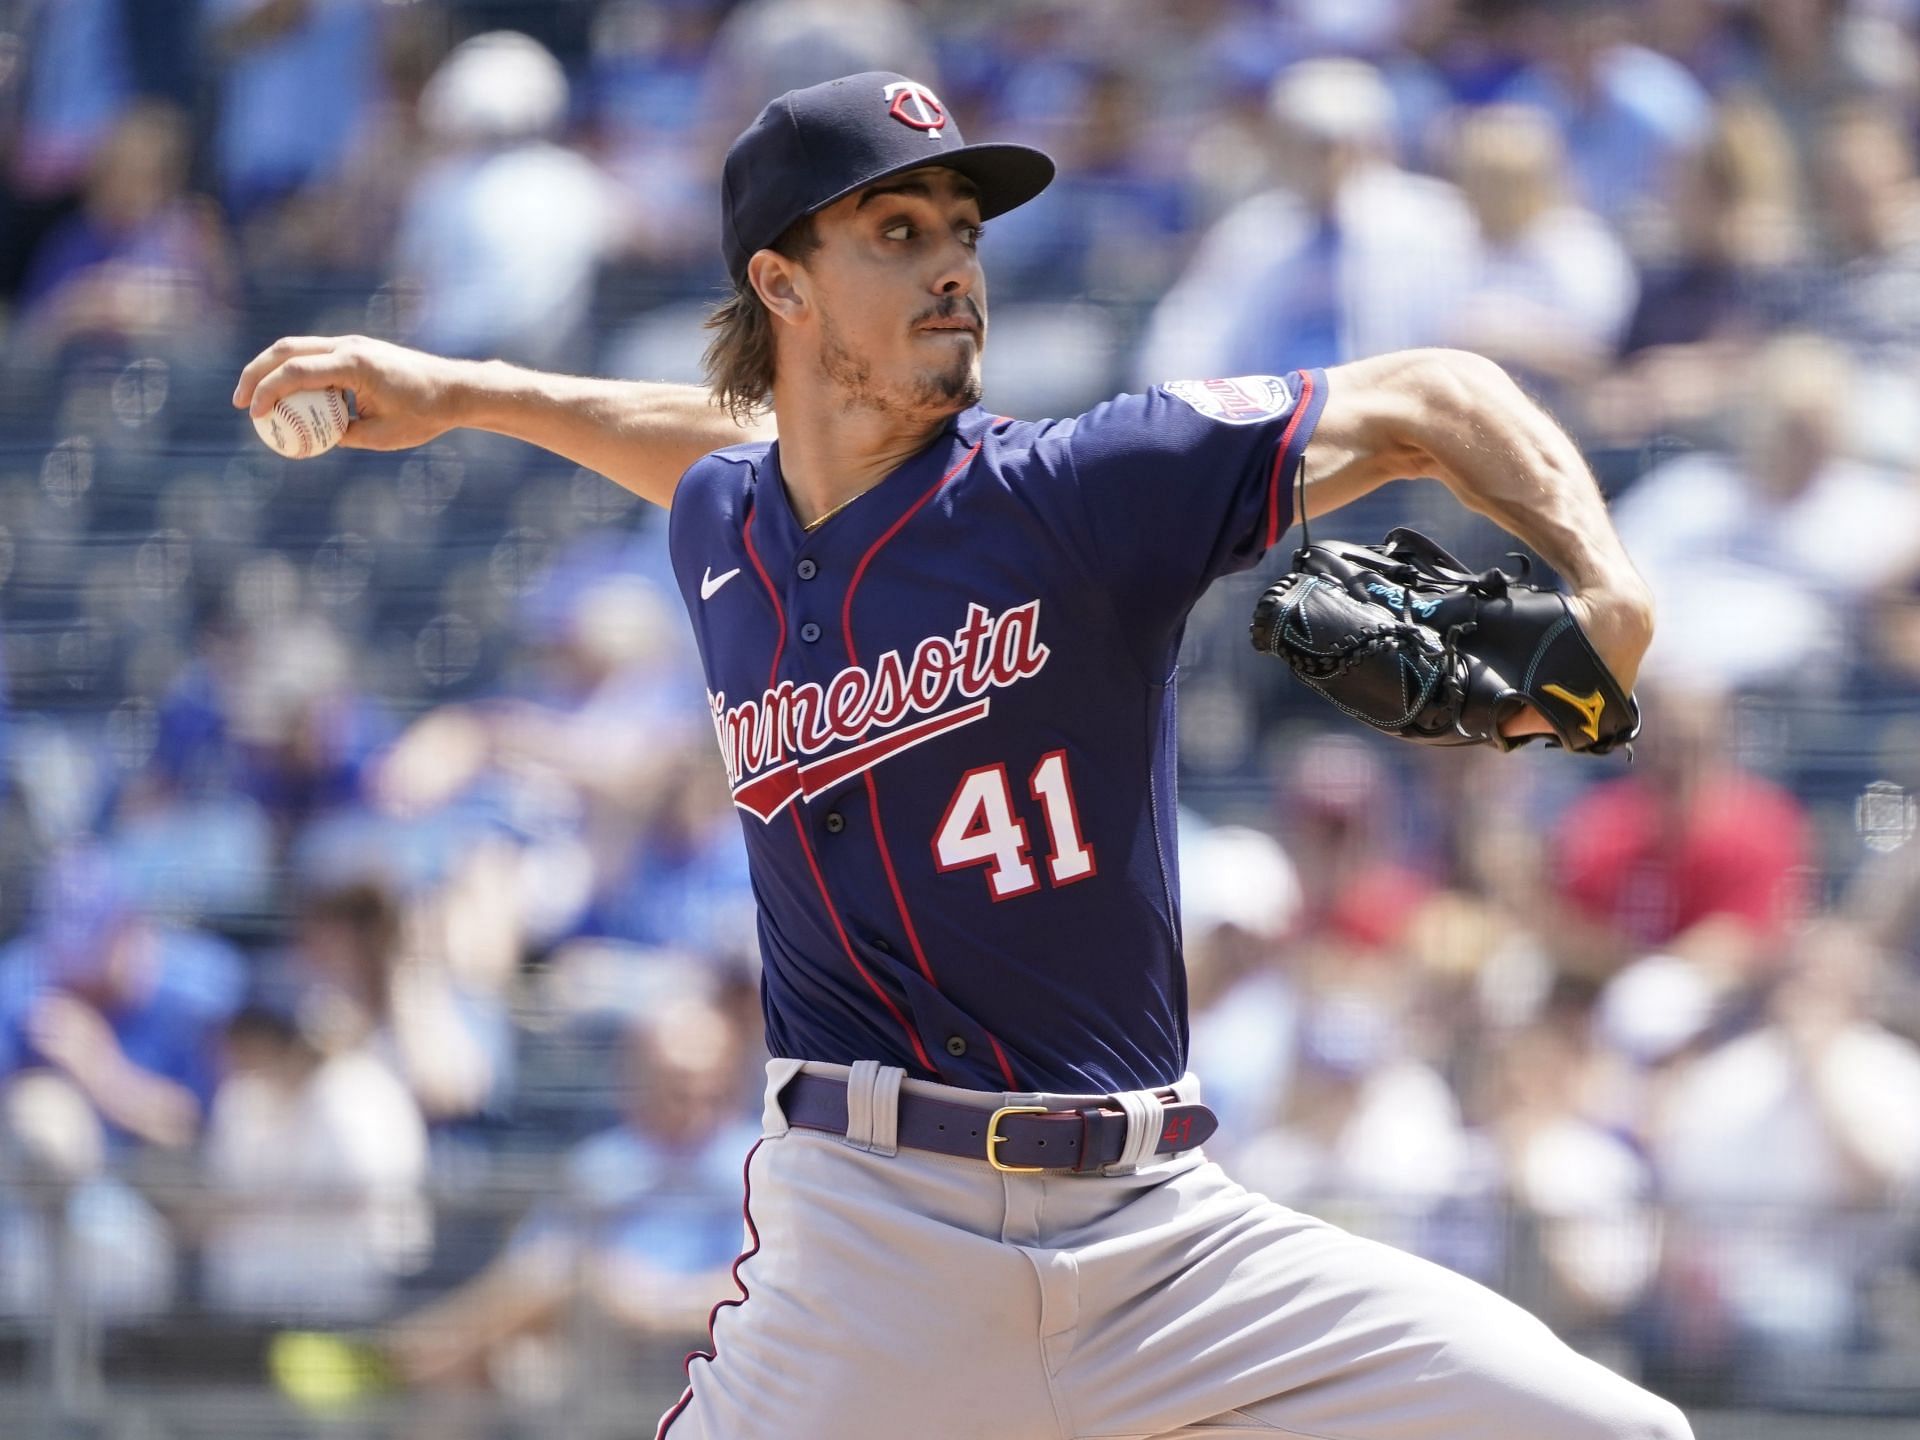 Joe Ryan of the Minnesota Twins throws in the first inning against the Kansas City Royals.